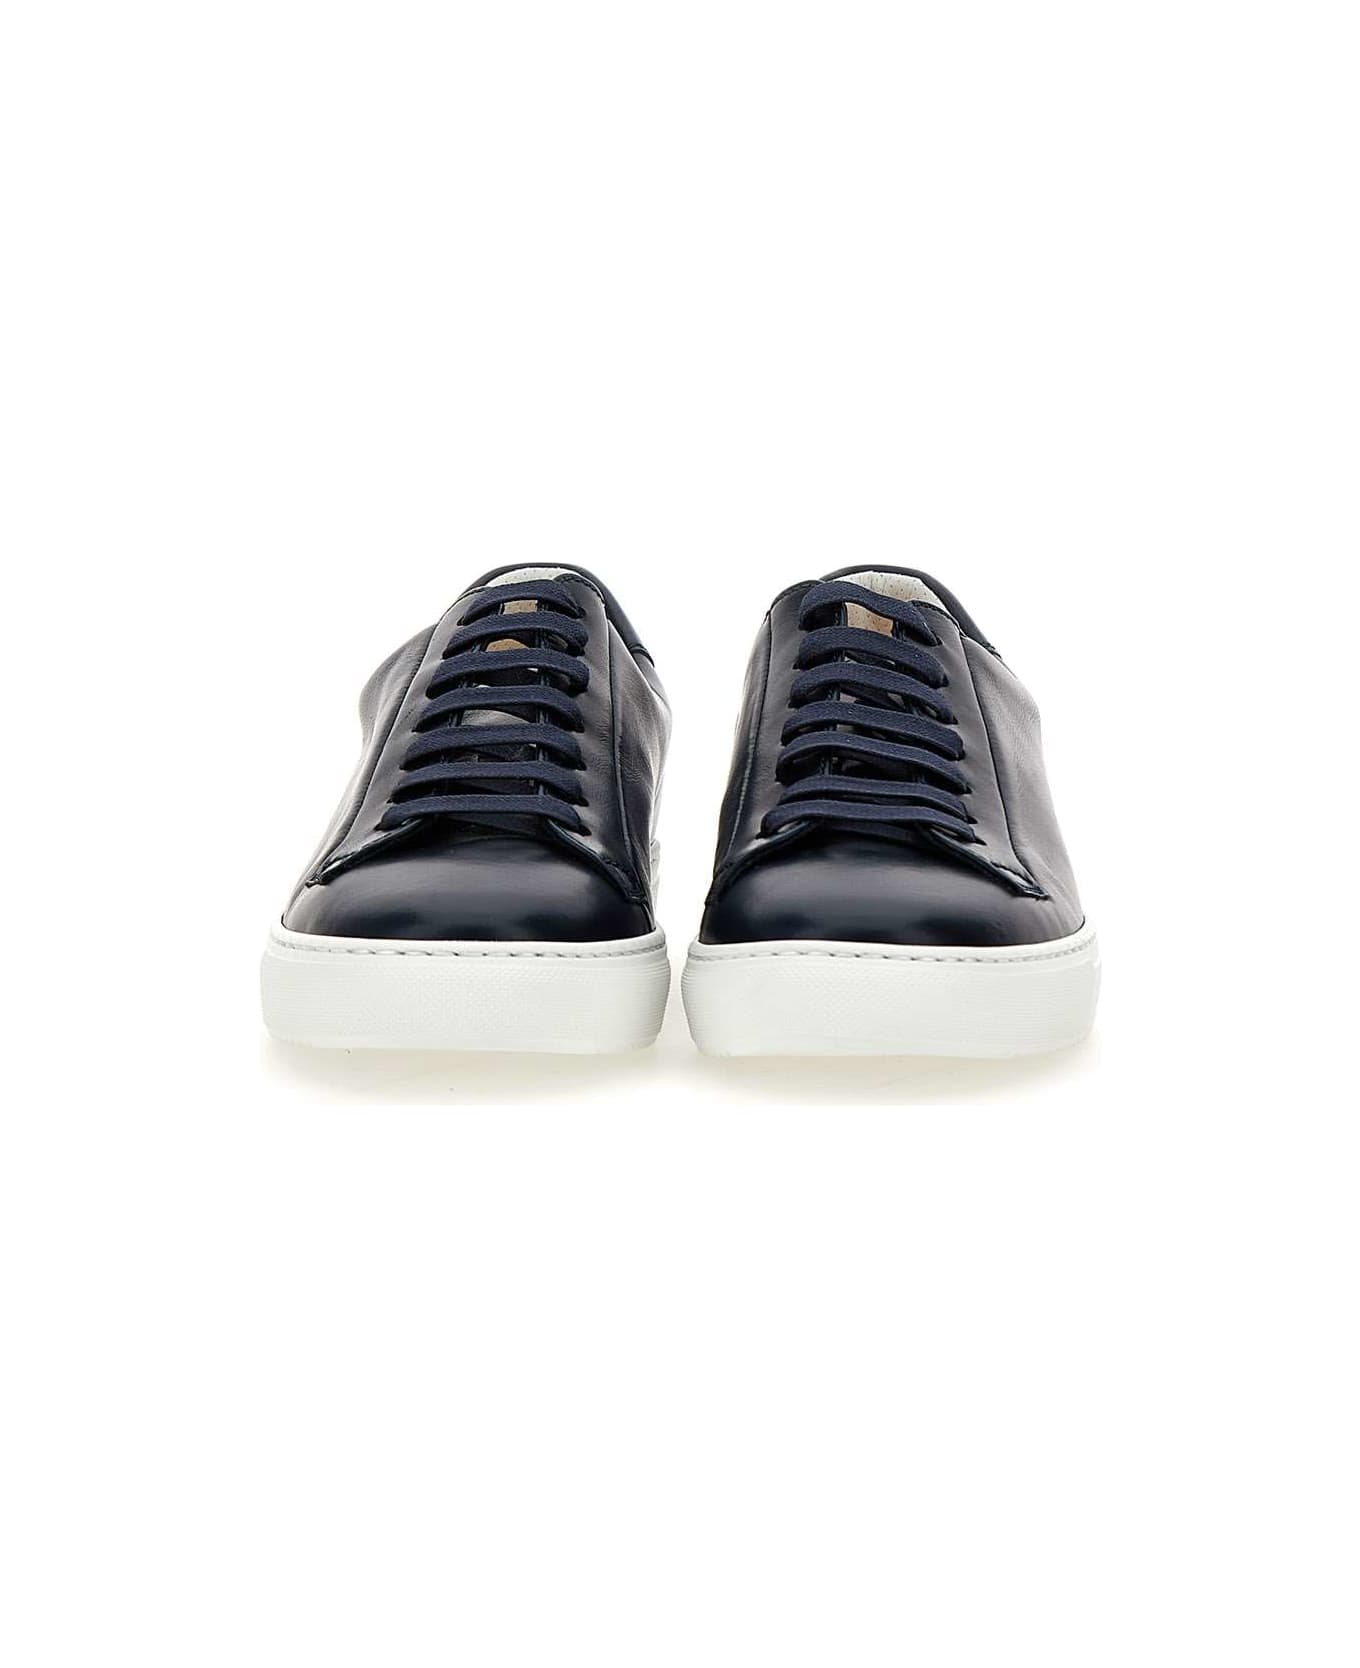 Doucal's "chiffon" Leather Sneakers - BLUE スニーカー